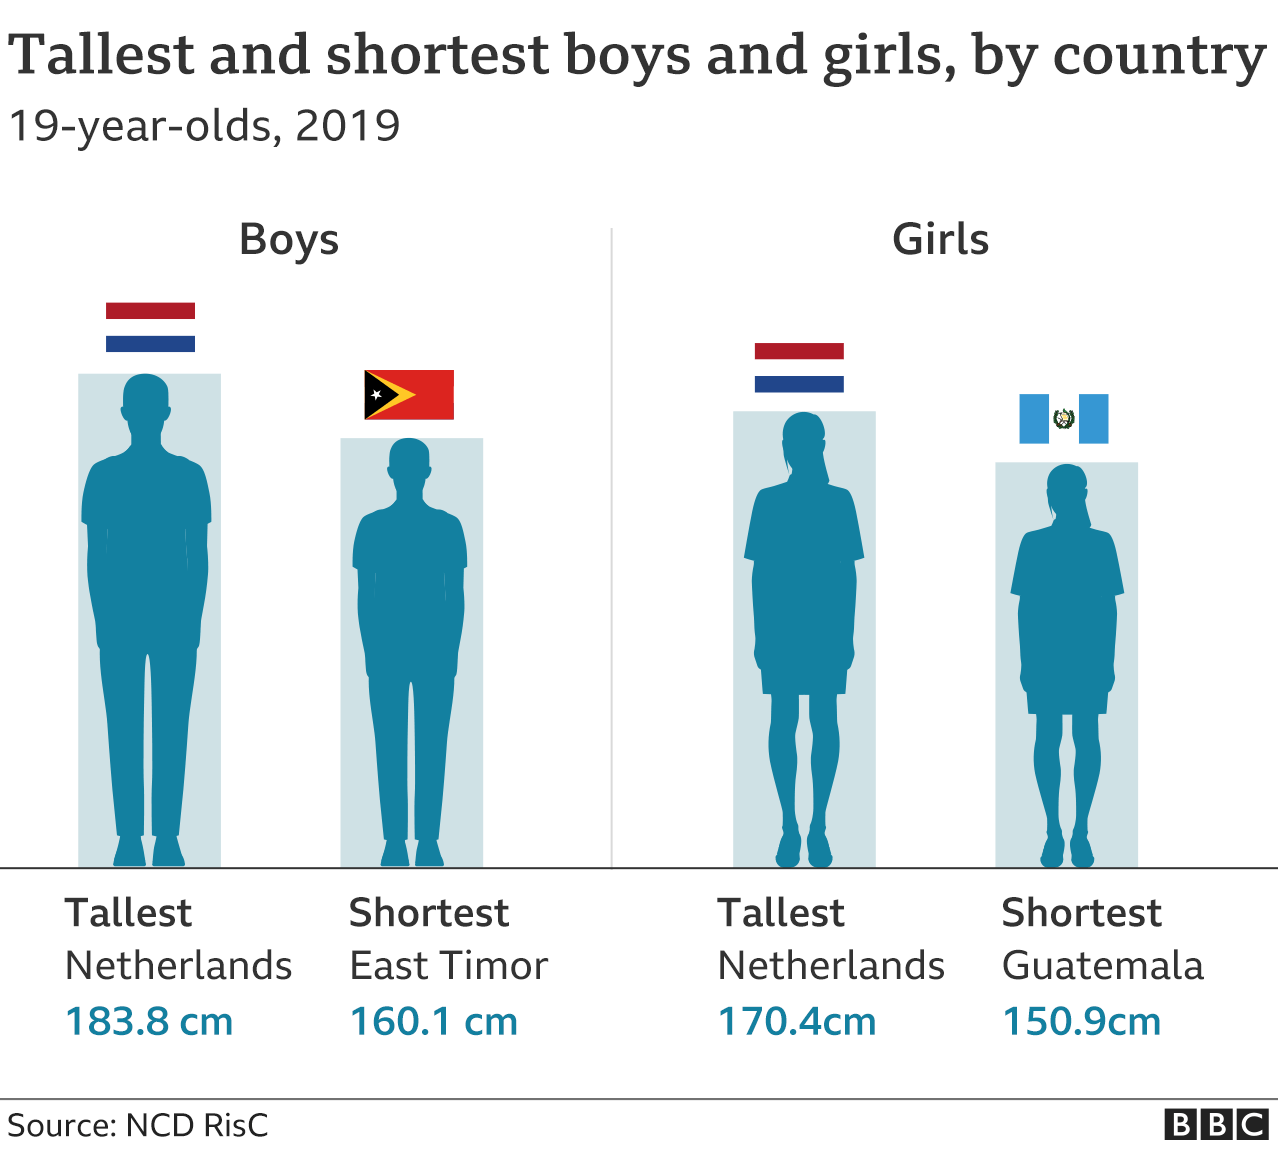 Tallest and shortest children by country